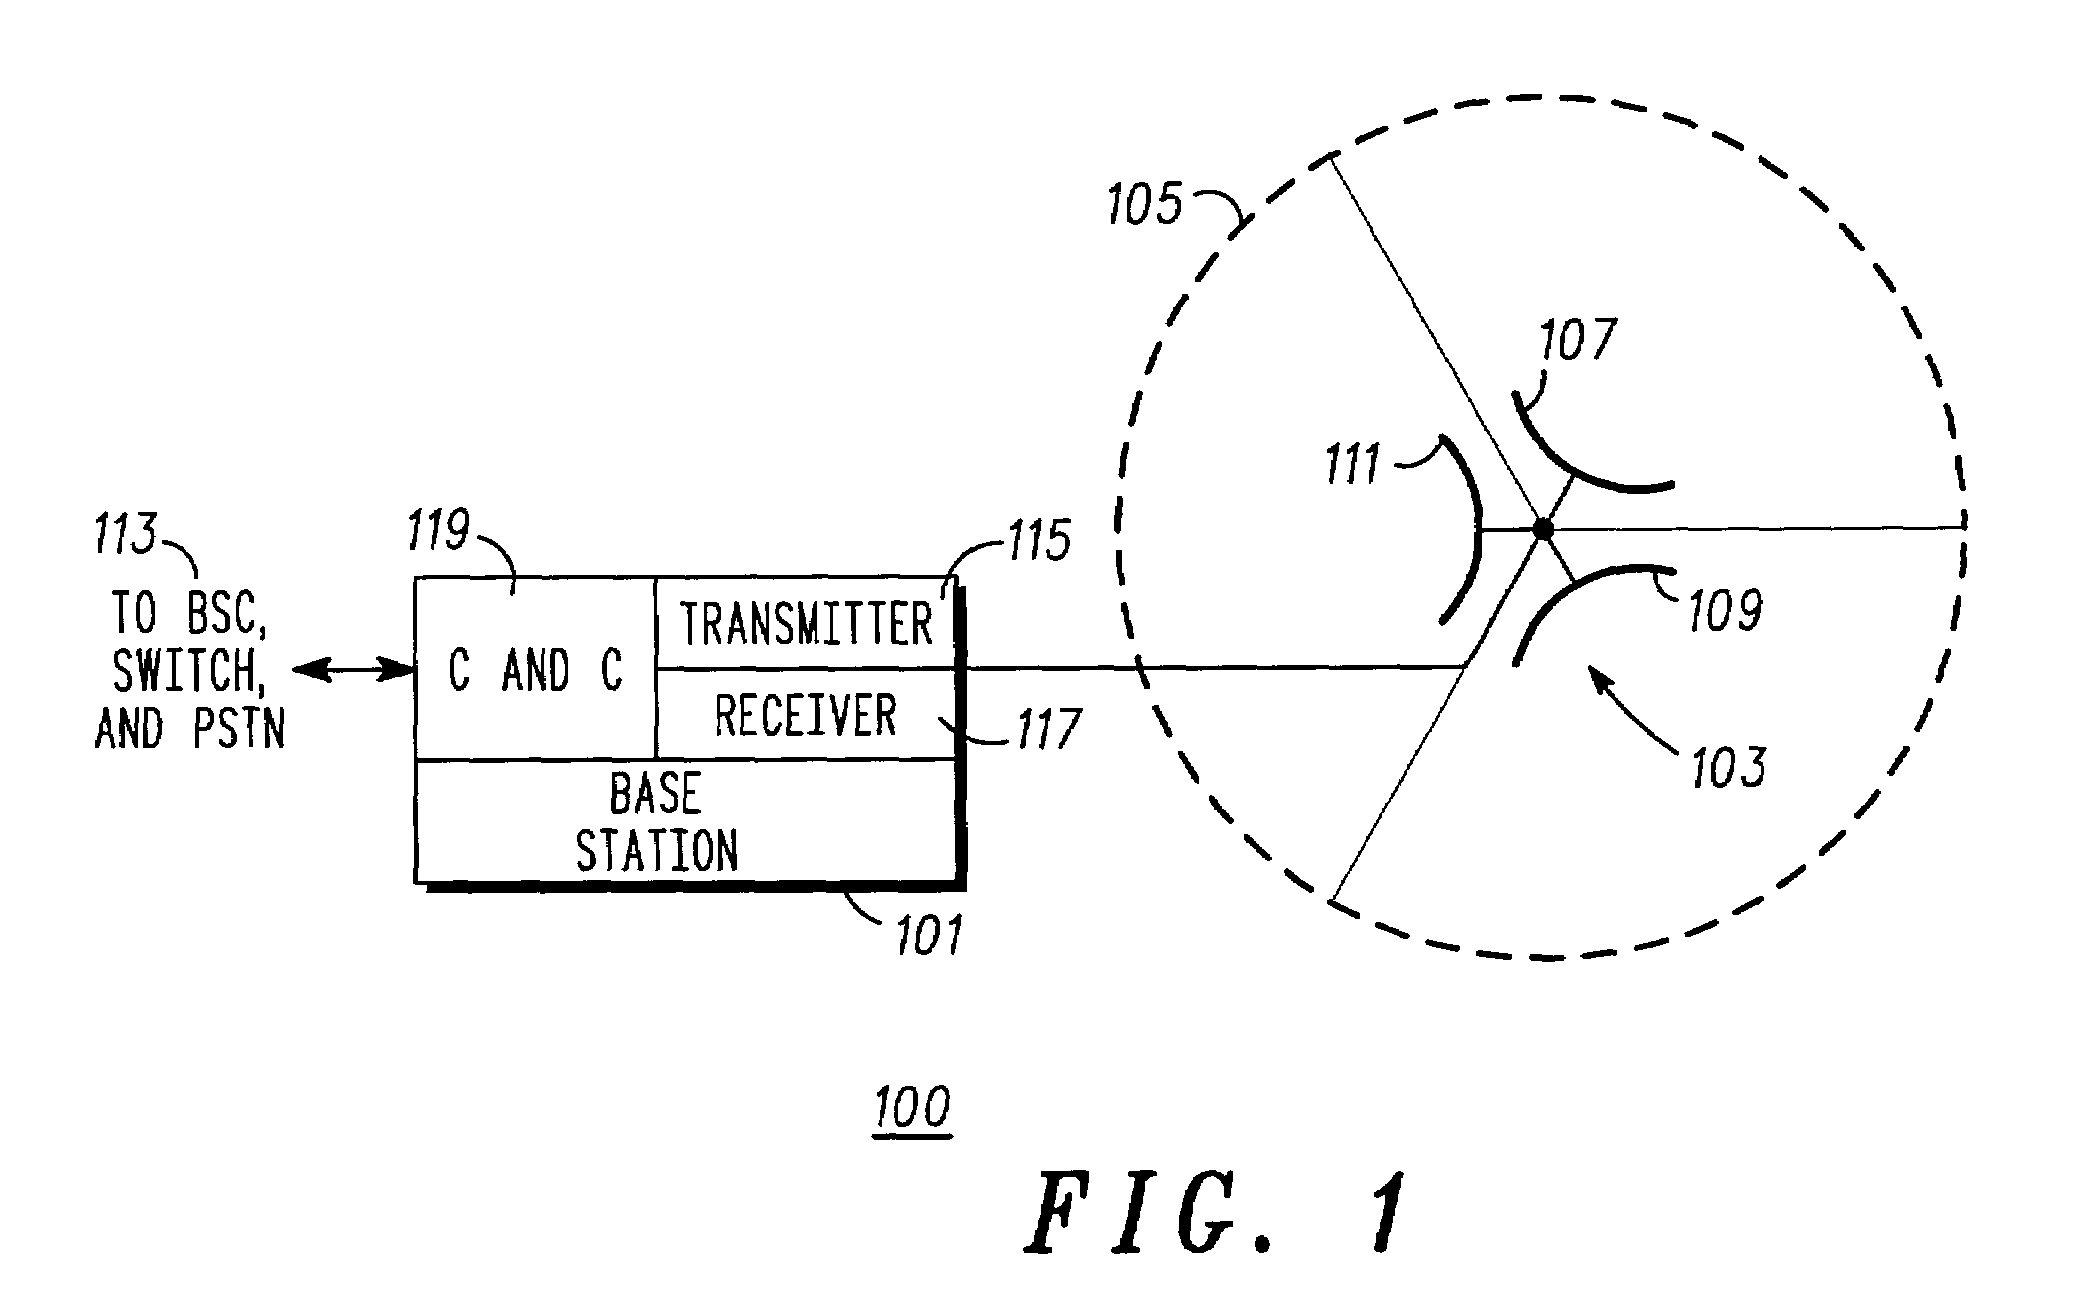 Method and apparatus for reducing transmitter peak power requirements using dual matrices